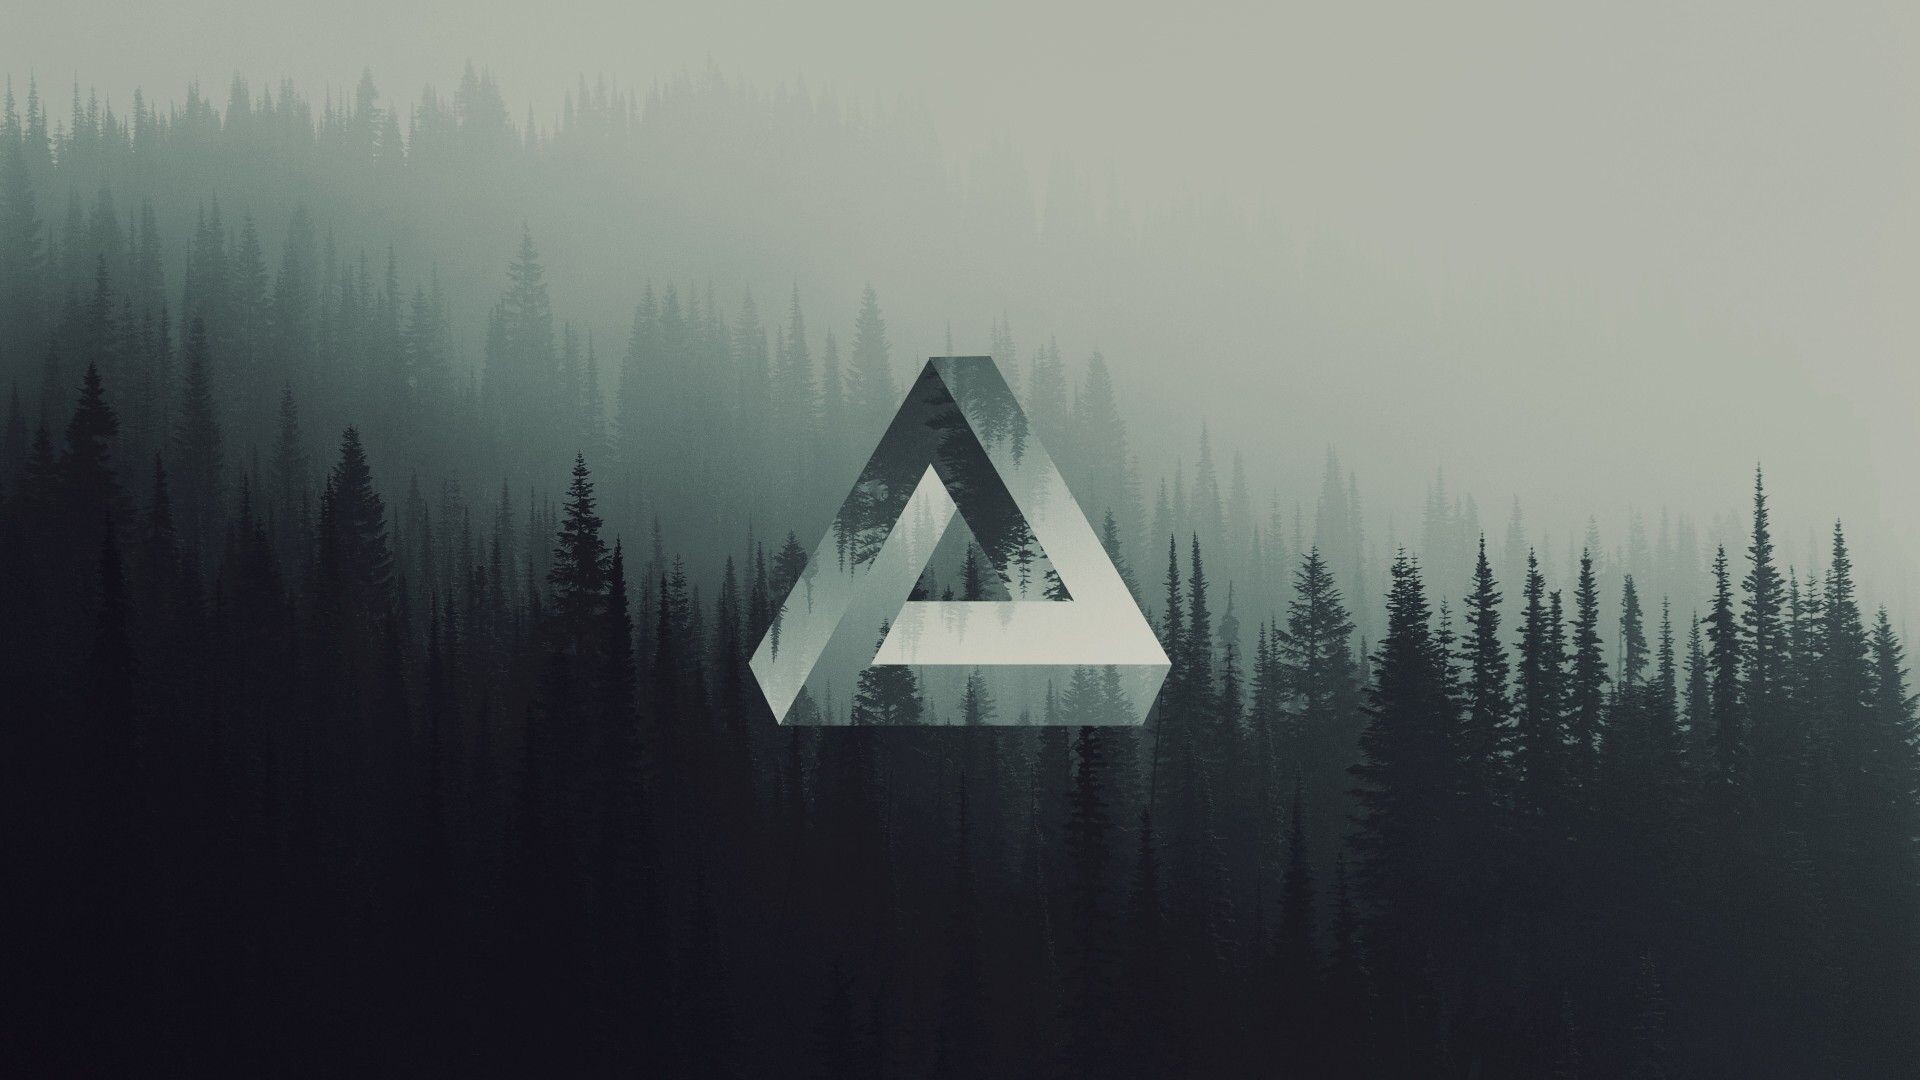 Triangle: Penrose triangle, Natural landscape, Evergreen forest. 1920x1080 Full HD Wallpaper.